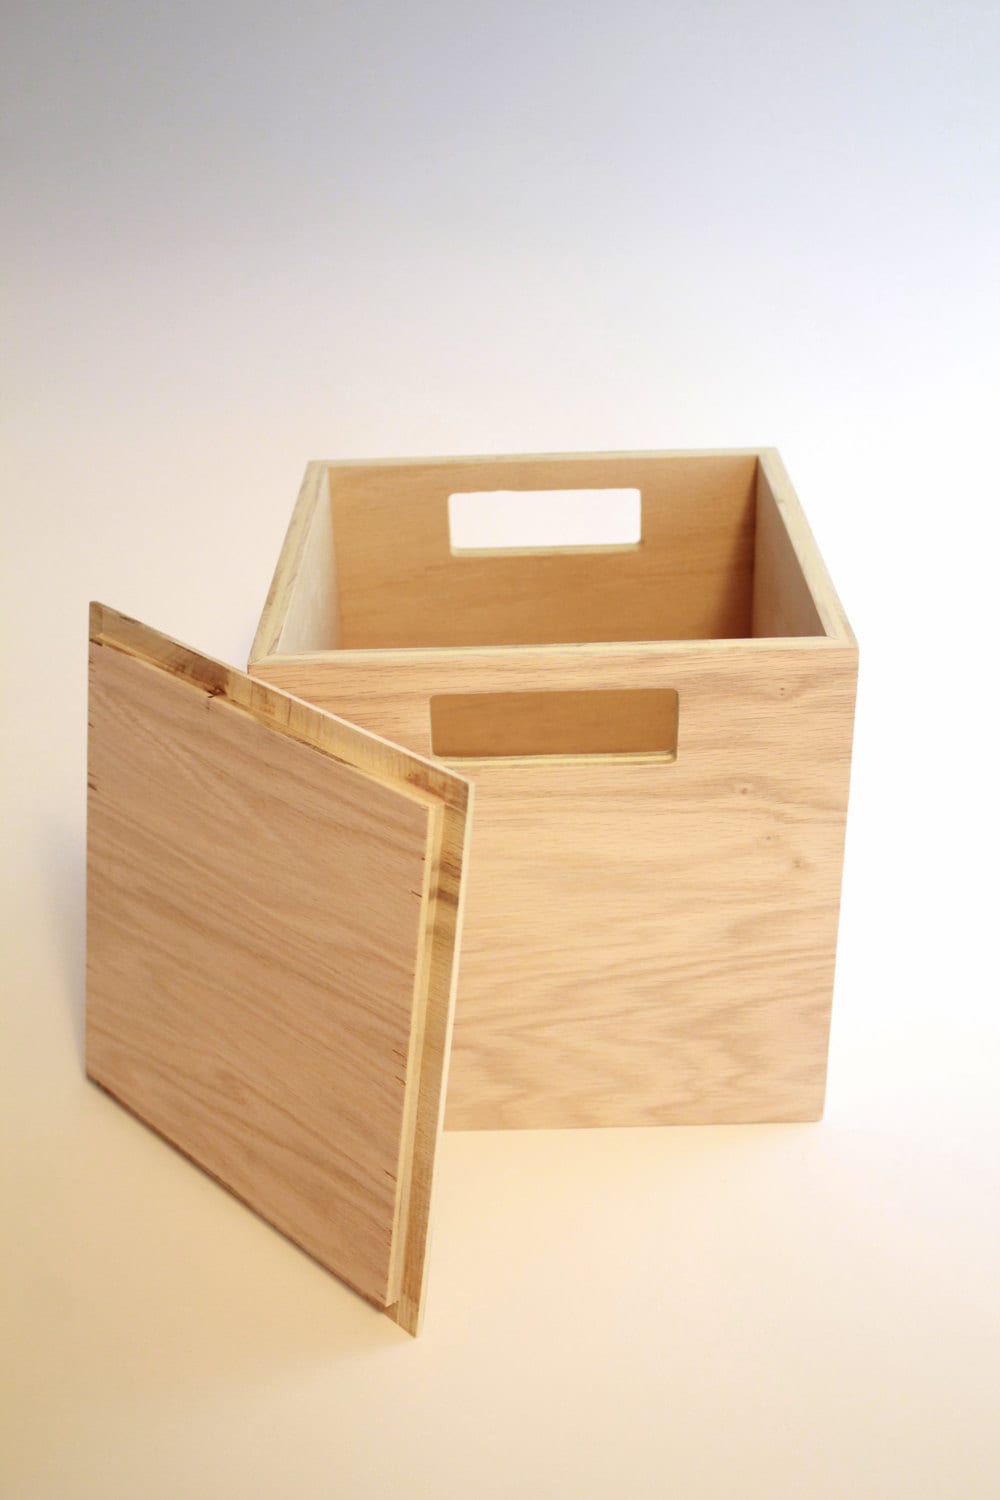 Wooden Storage Box With Lid and Handles Playroom Box Baby Toy